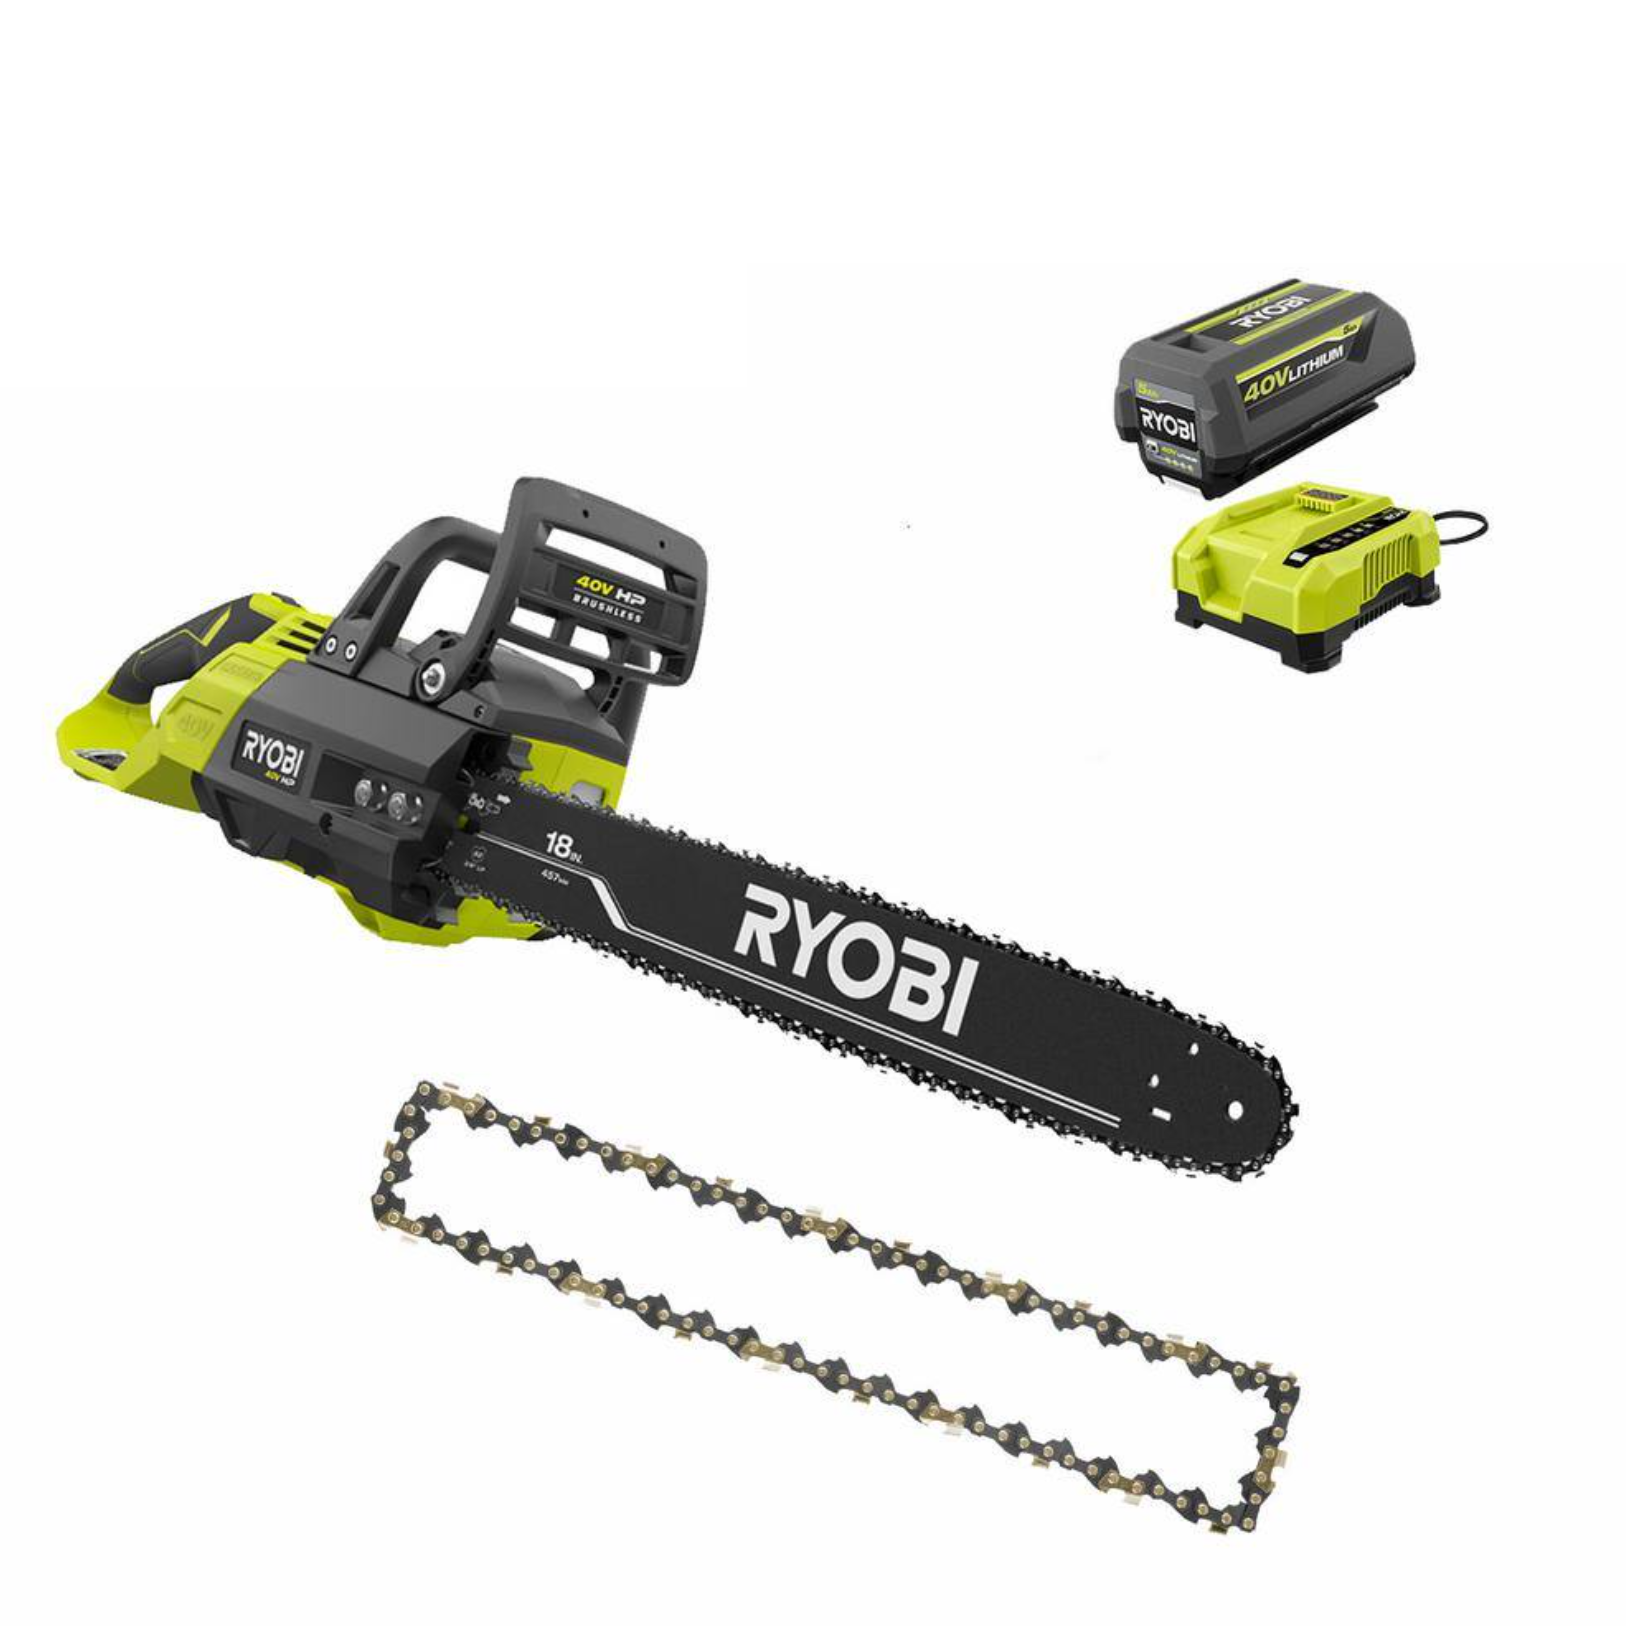 RYOBI RY40580-AC 40V HP Brushless 18 in Battery Chainsaw w/ Extra 18 in. Chain， 5.0 Ah Battery and Charger